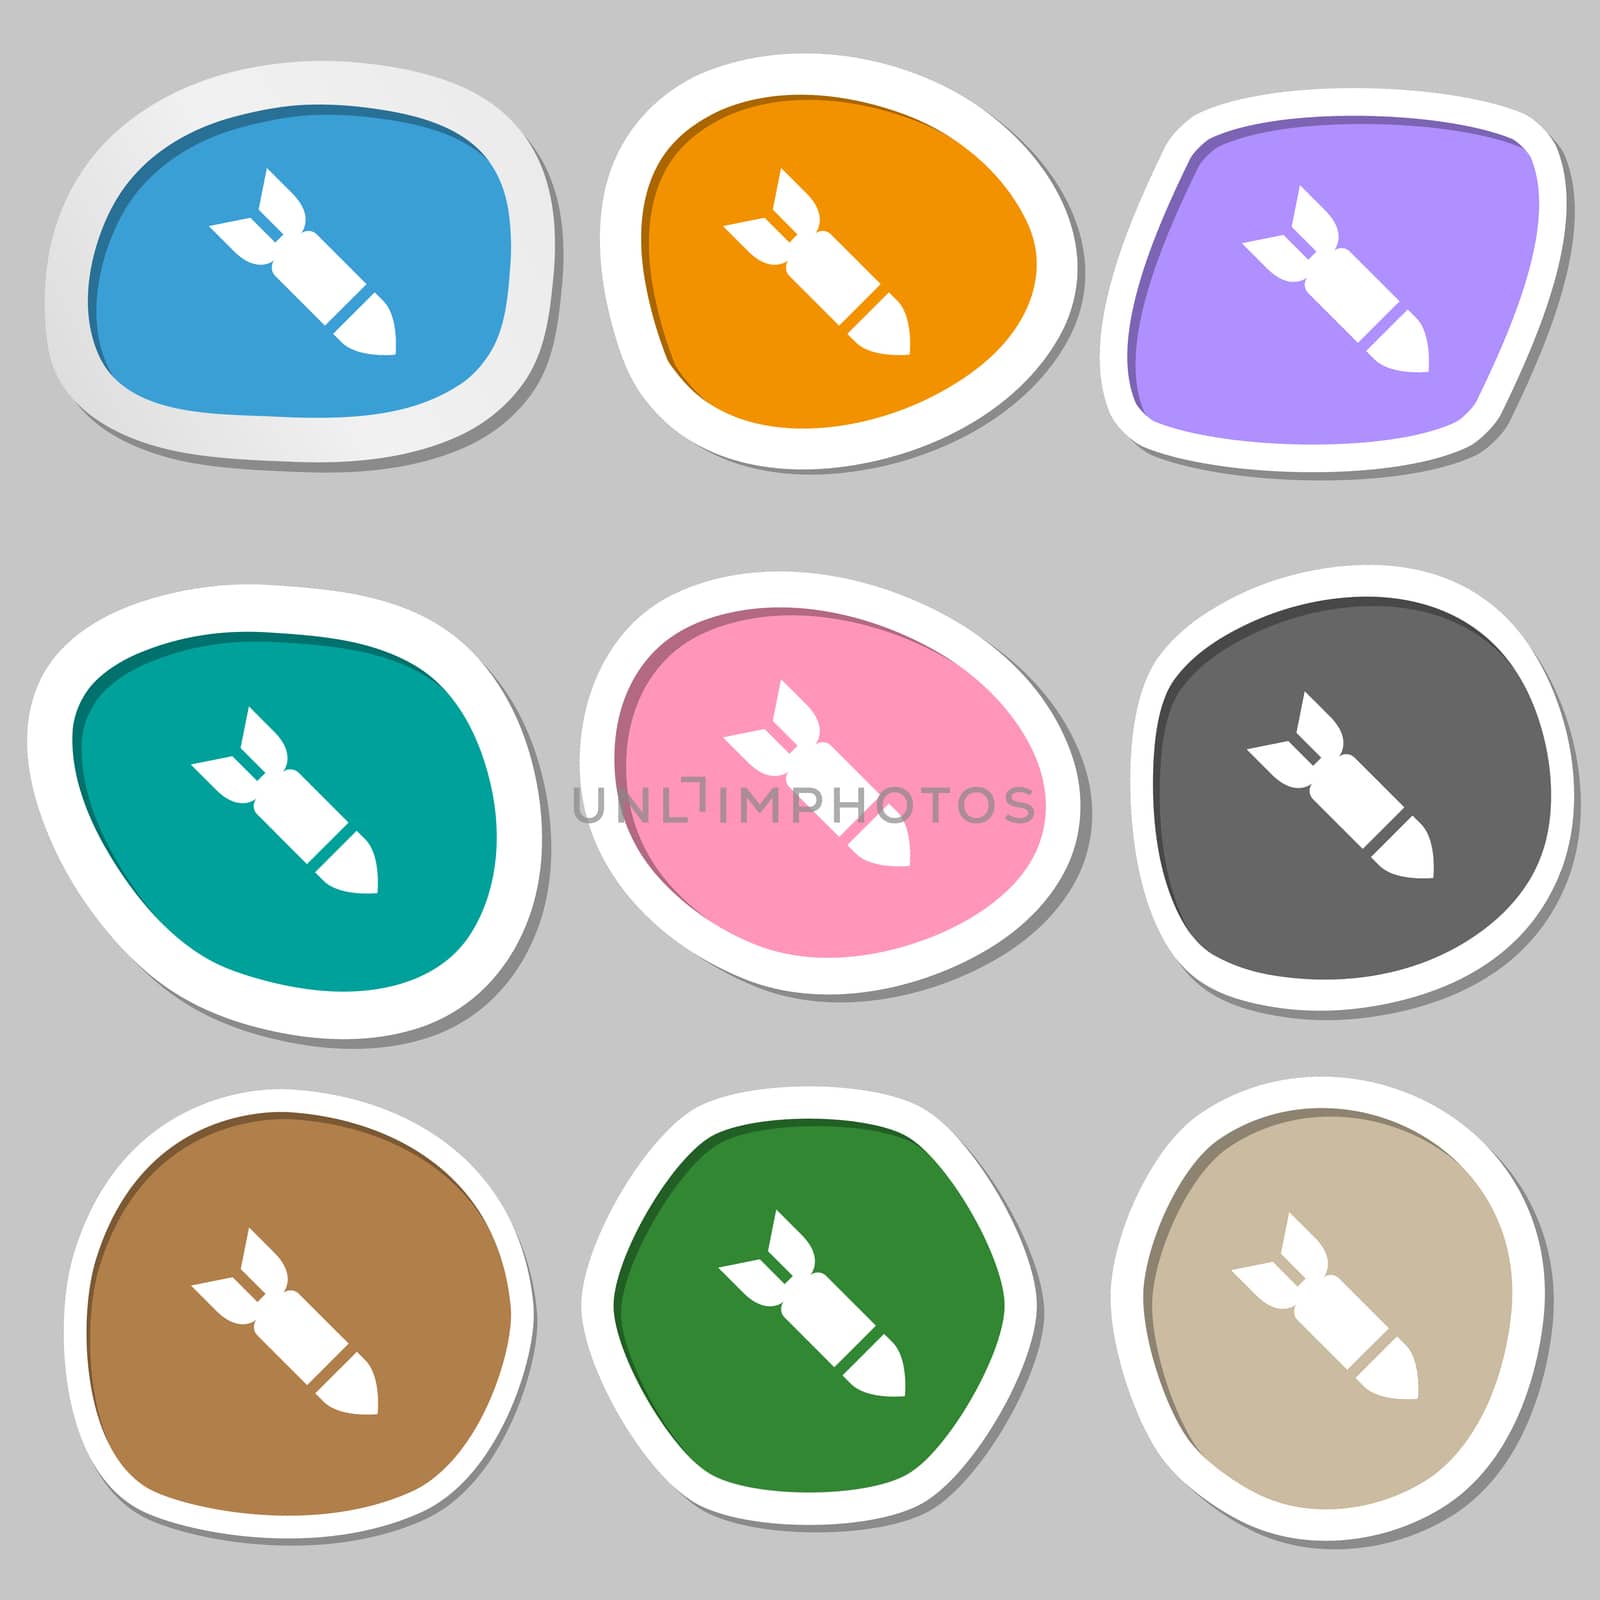 Missile,Rocket weapon icon symbols. Multicolored paper stickers. illustration